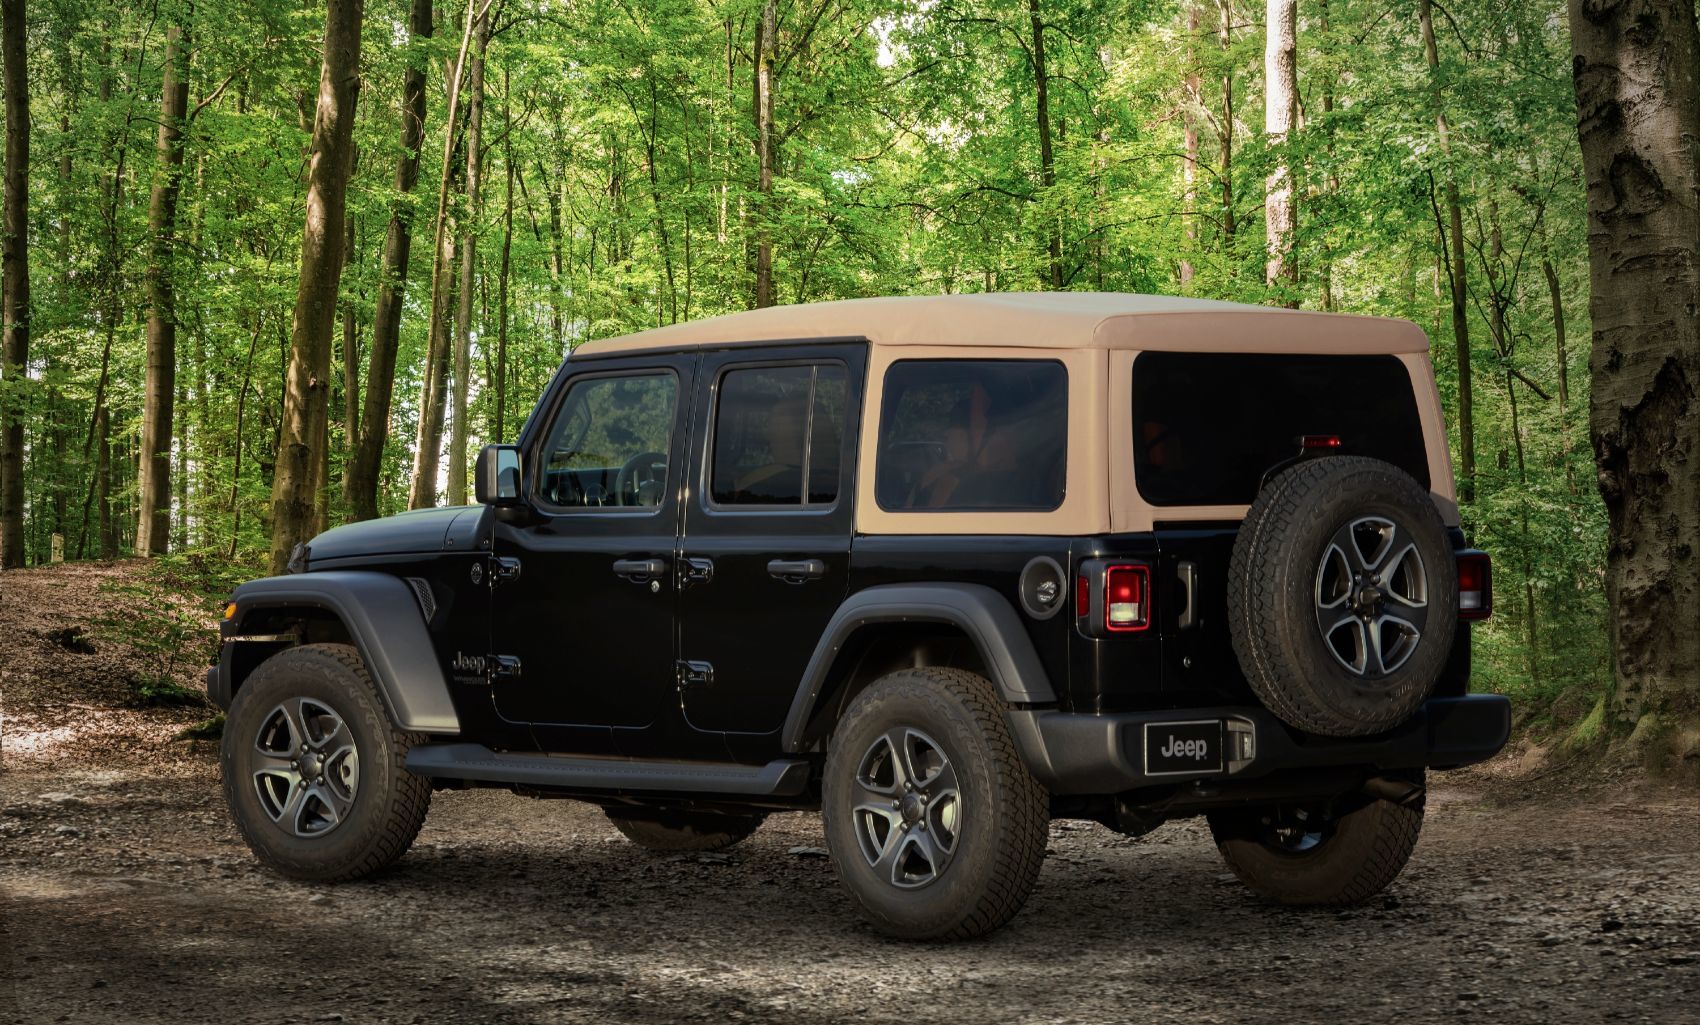 2020 Jeep Wrangler Willys; Black & Tan Editions Are Coming!